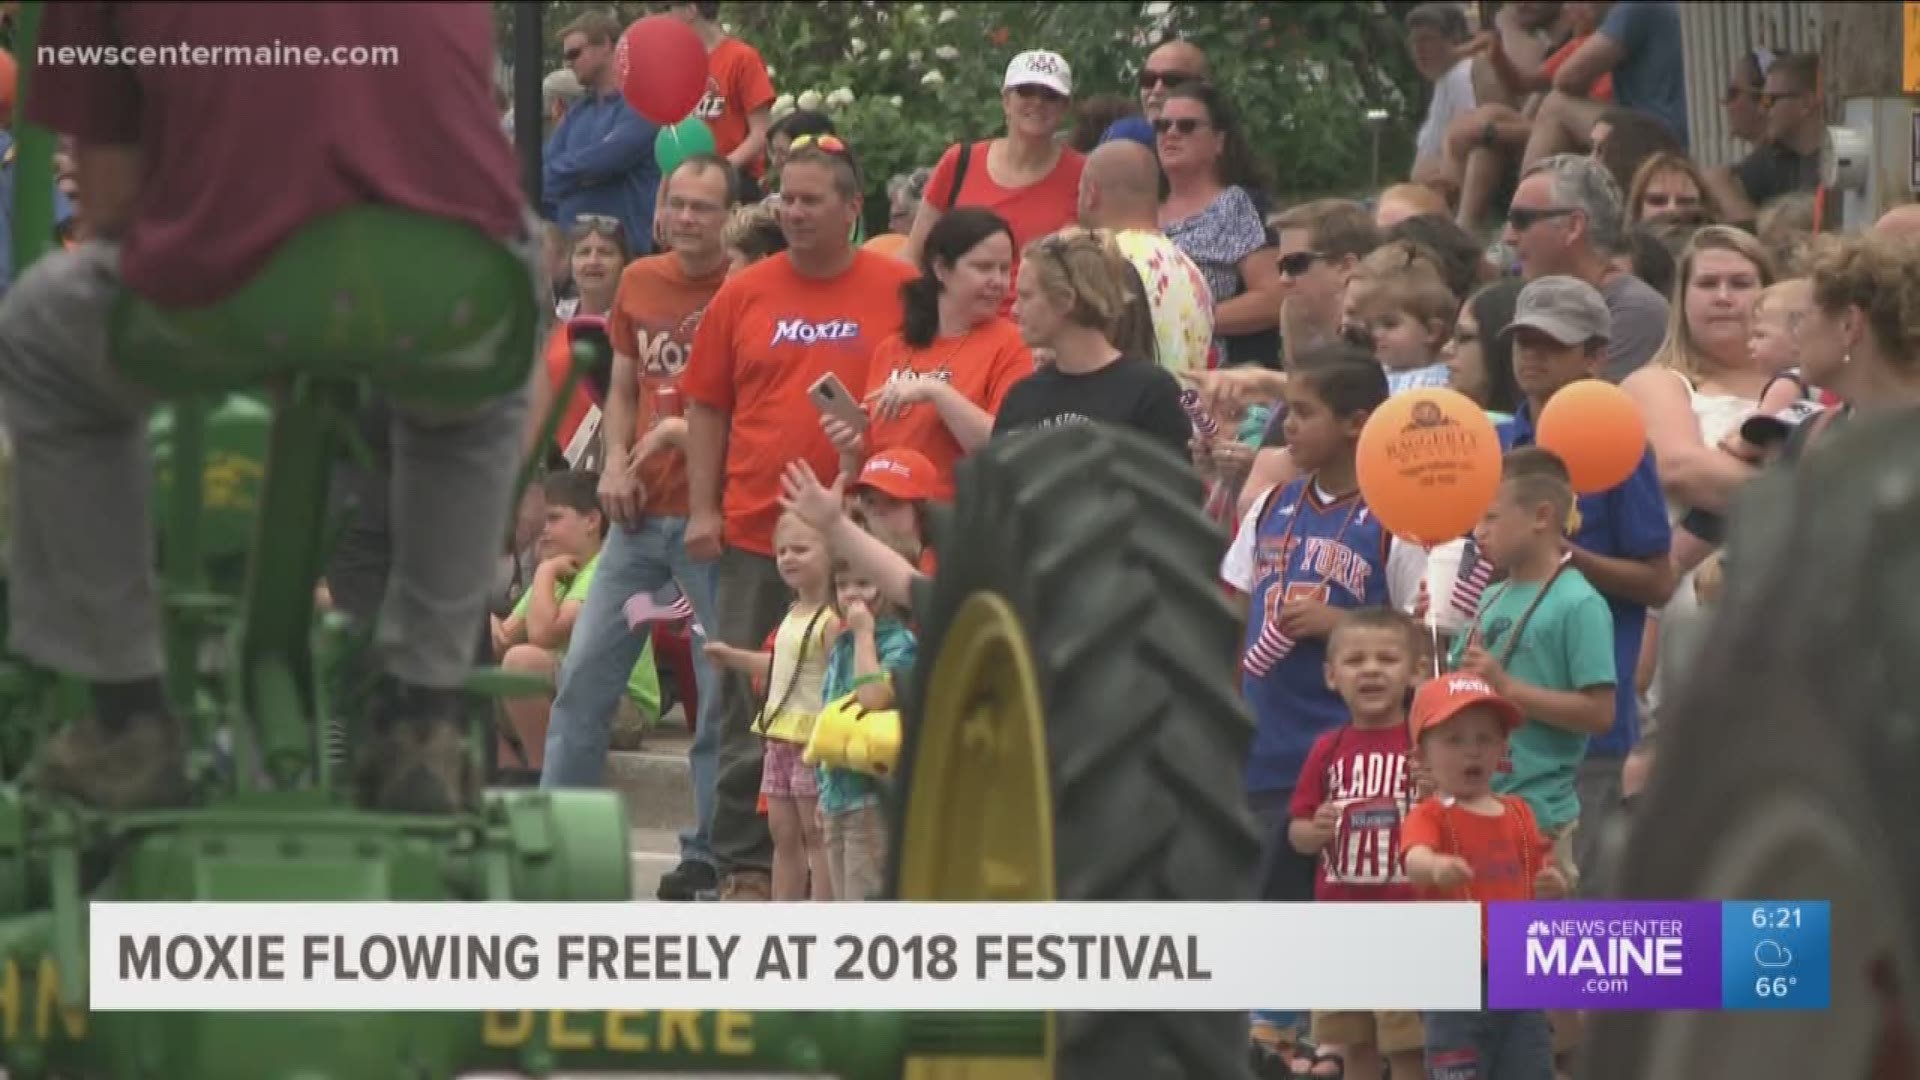 Moxie flowing freely at 2018 festival